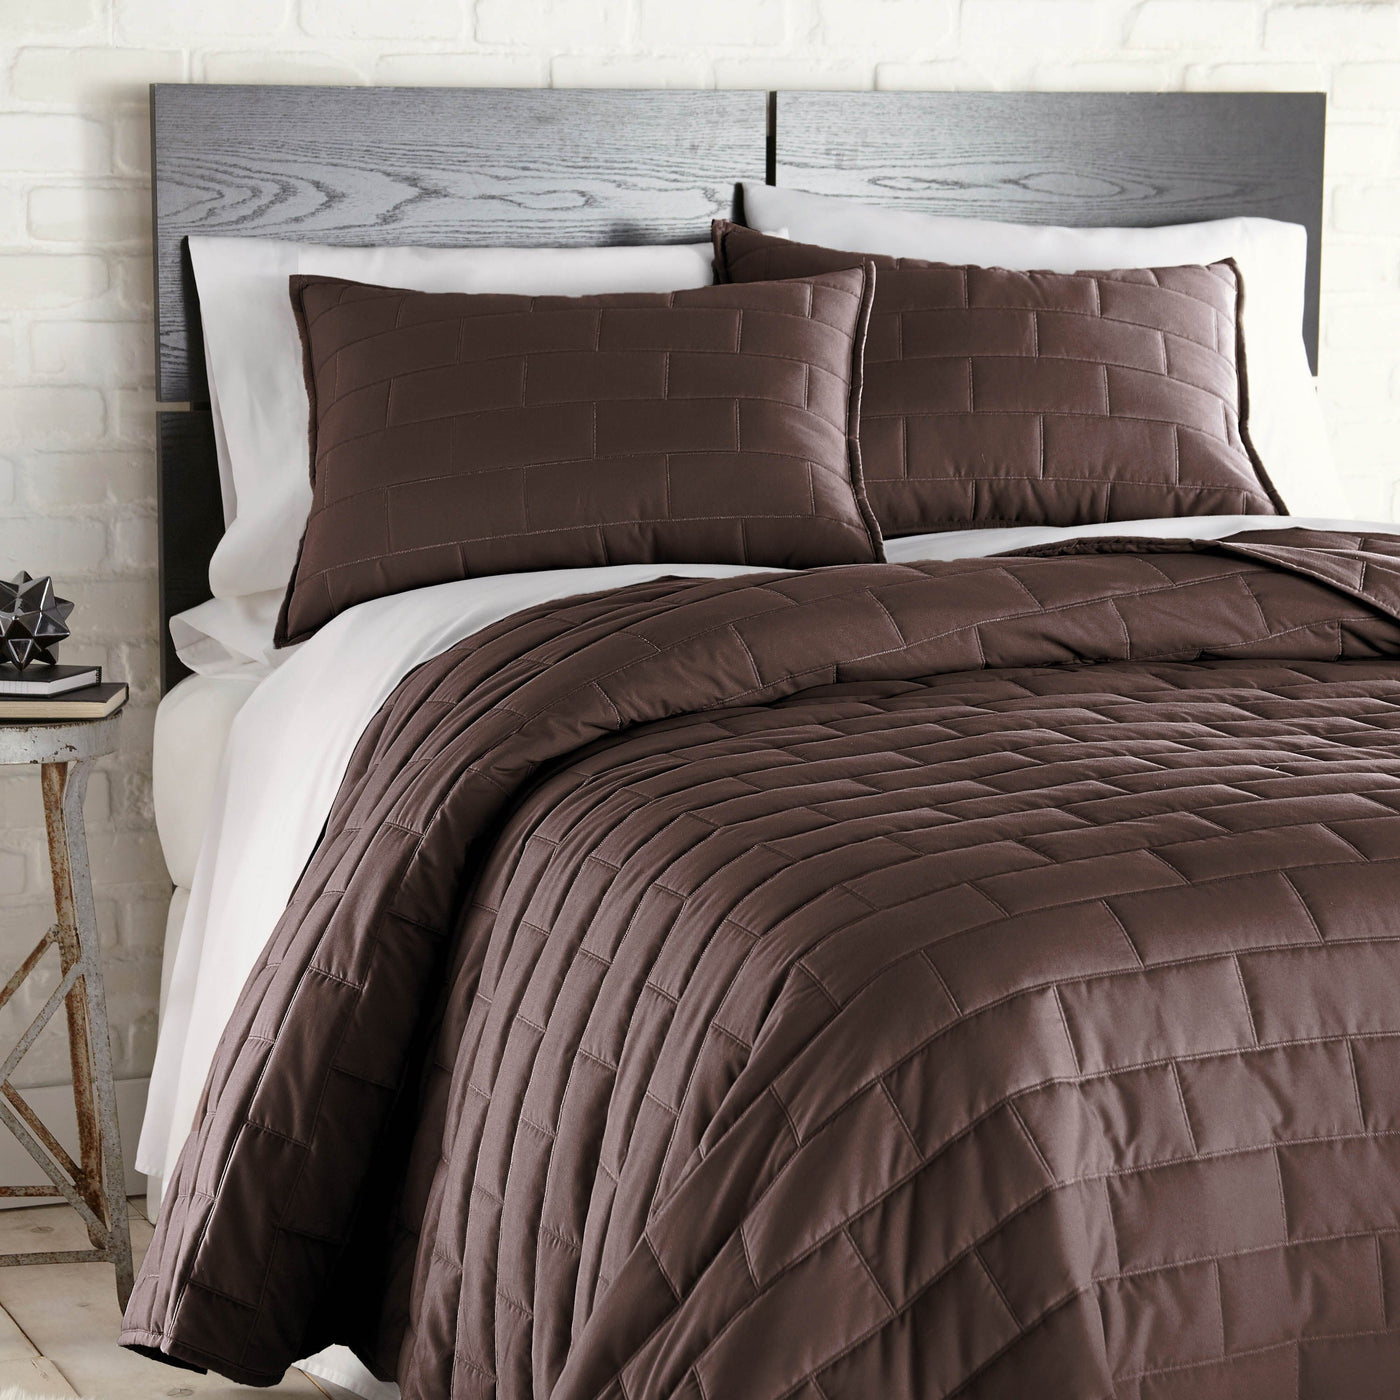 Front View of Vilano Brickyard Quilt Set in brown#color_vilano-chocolate-brown